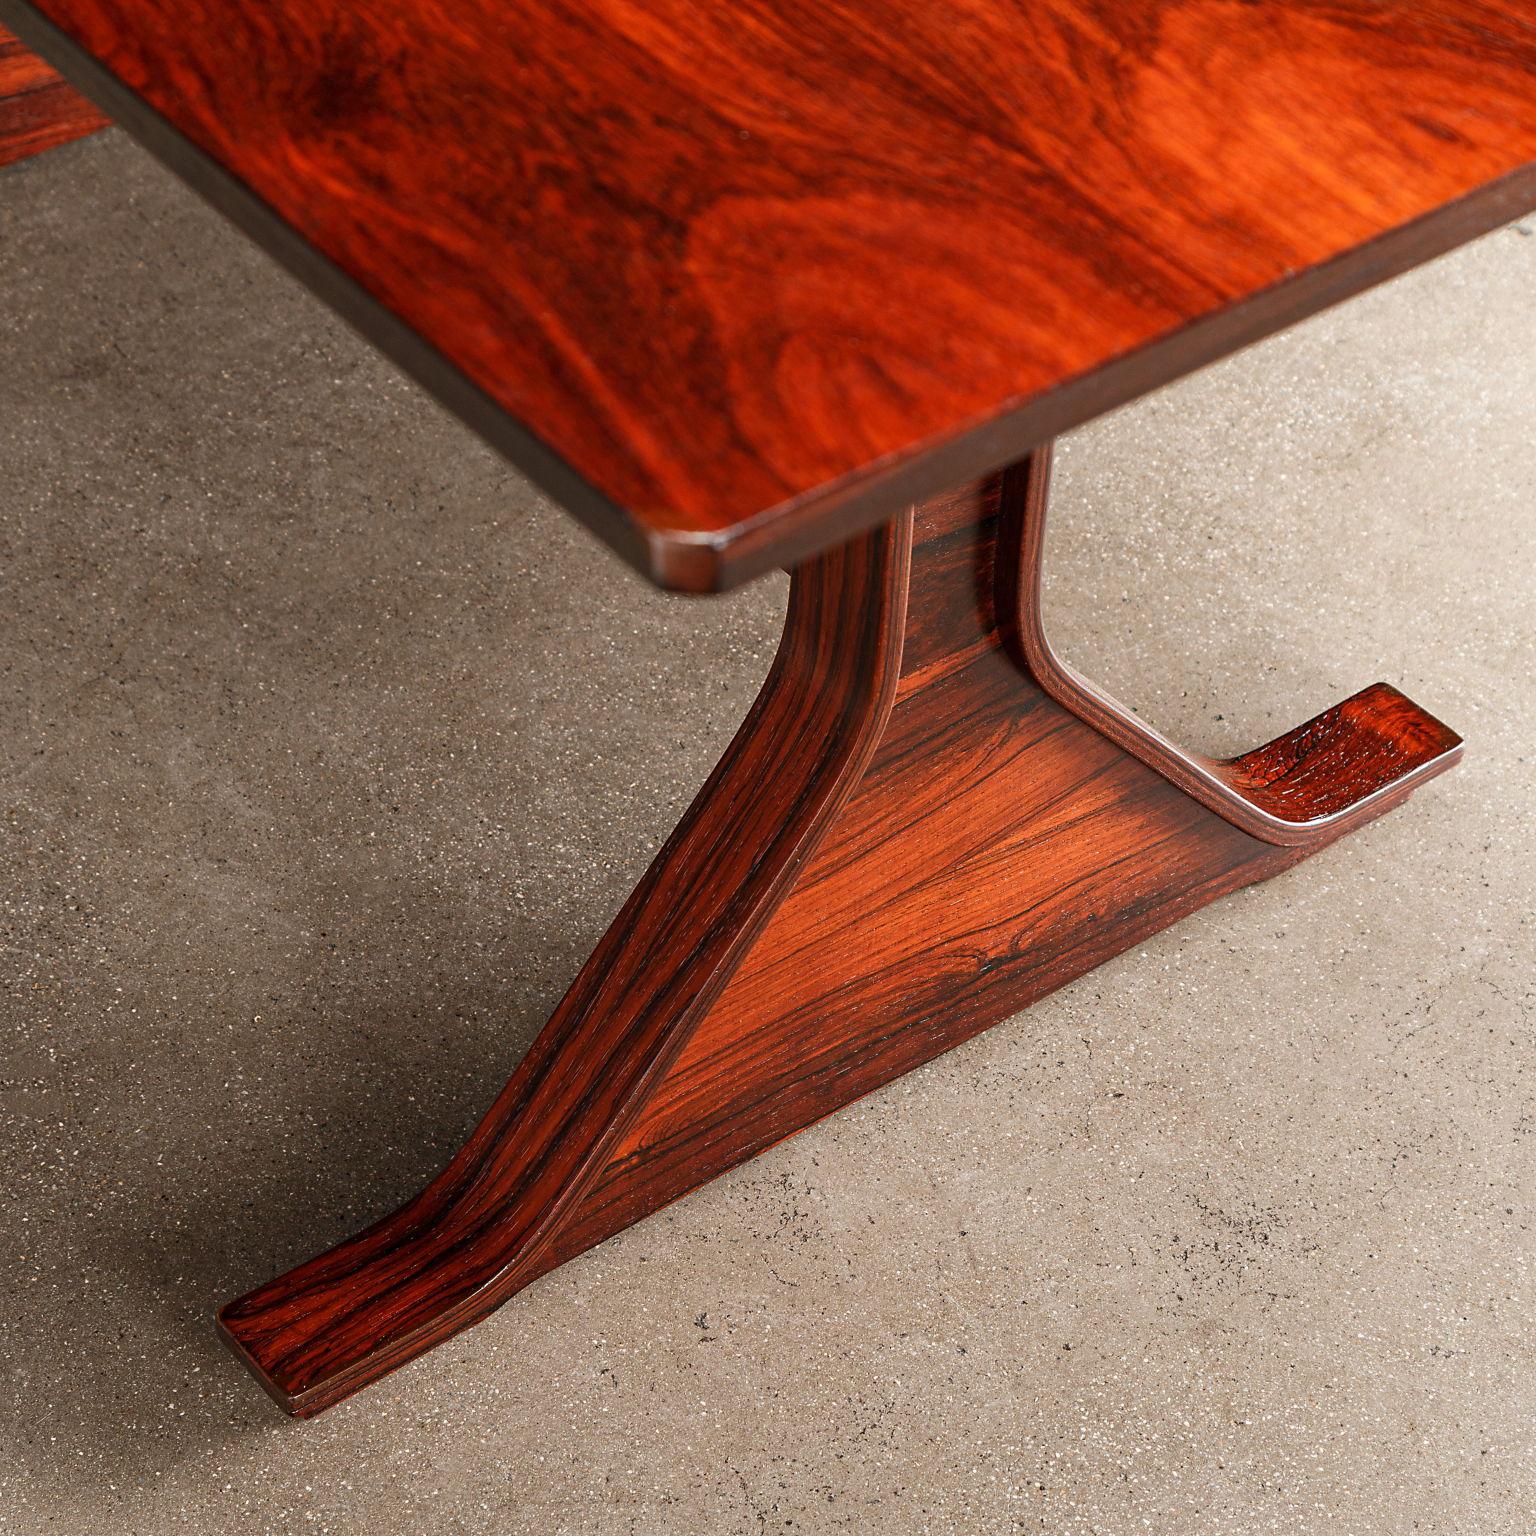 Rosewood table with curved solid wood structure. Model no. 522 designed by Gianfranco Frattini and produced by Bernini starting from 1960.